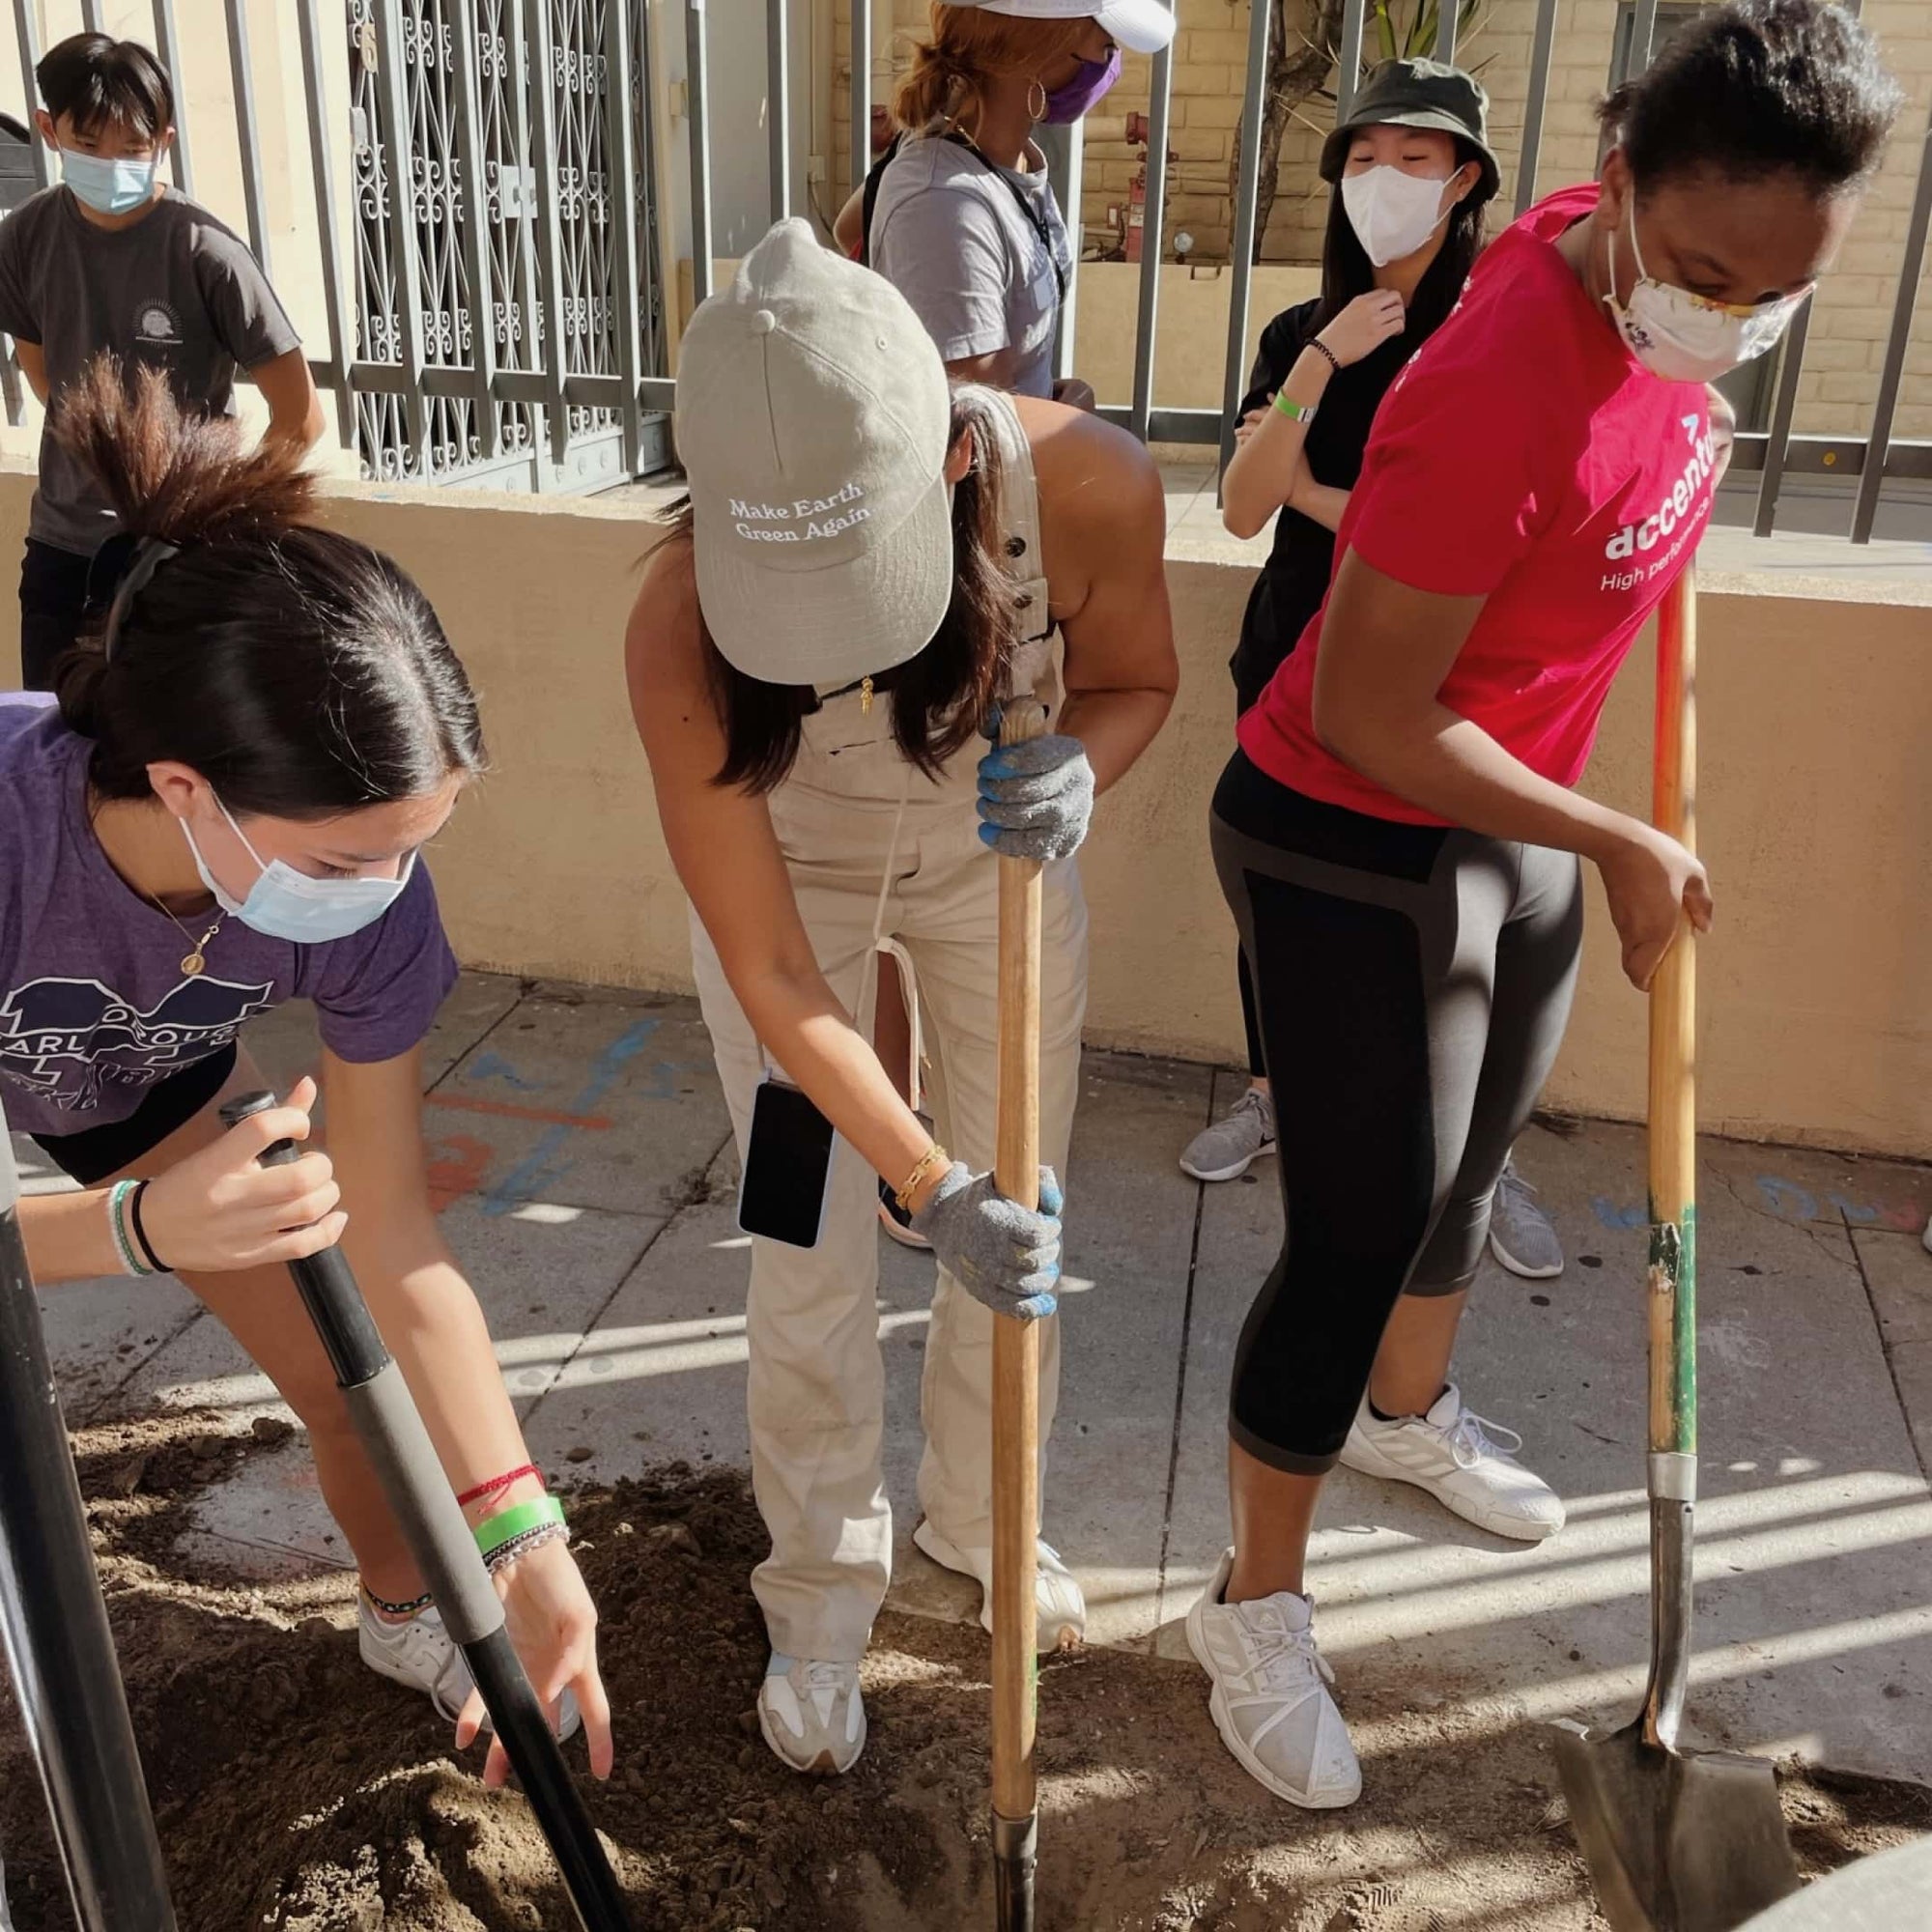 A group of people are digging a hole next to a sidewalk in LA